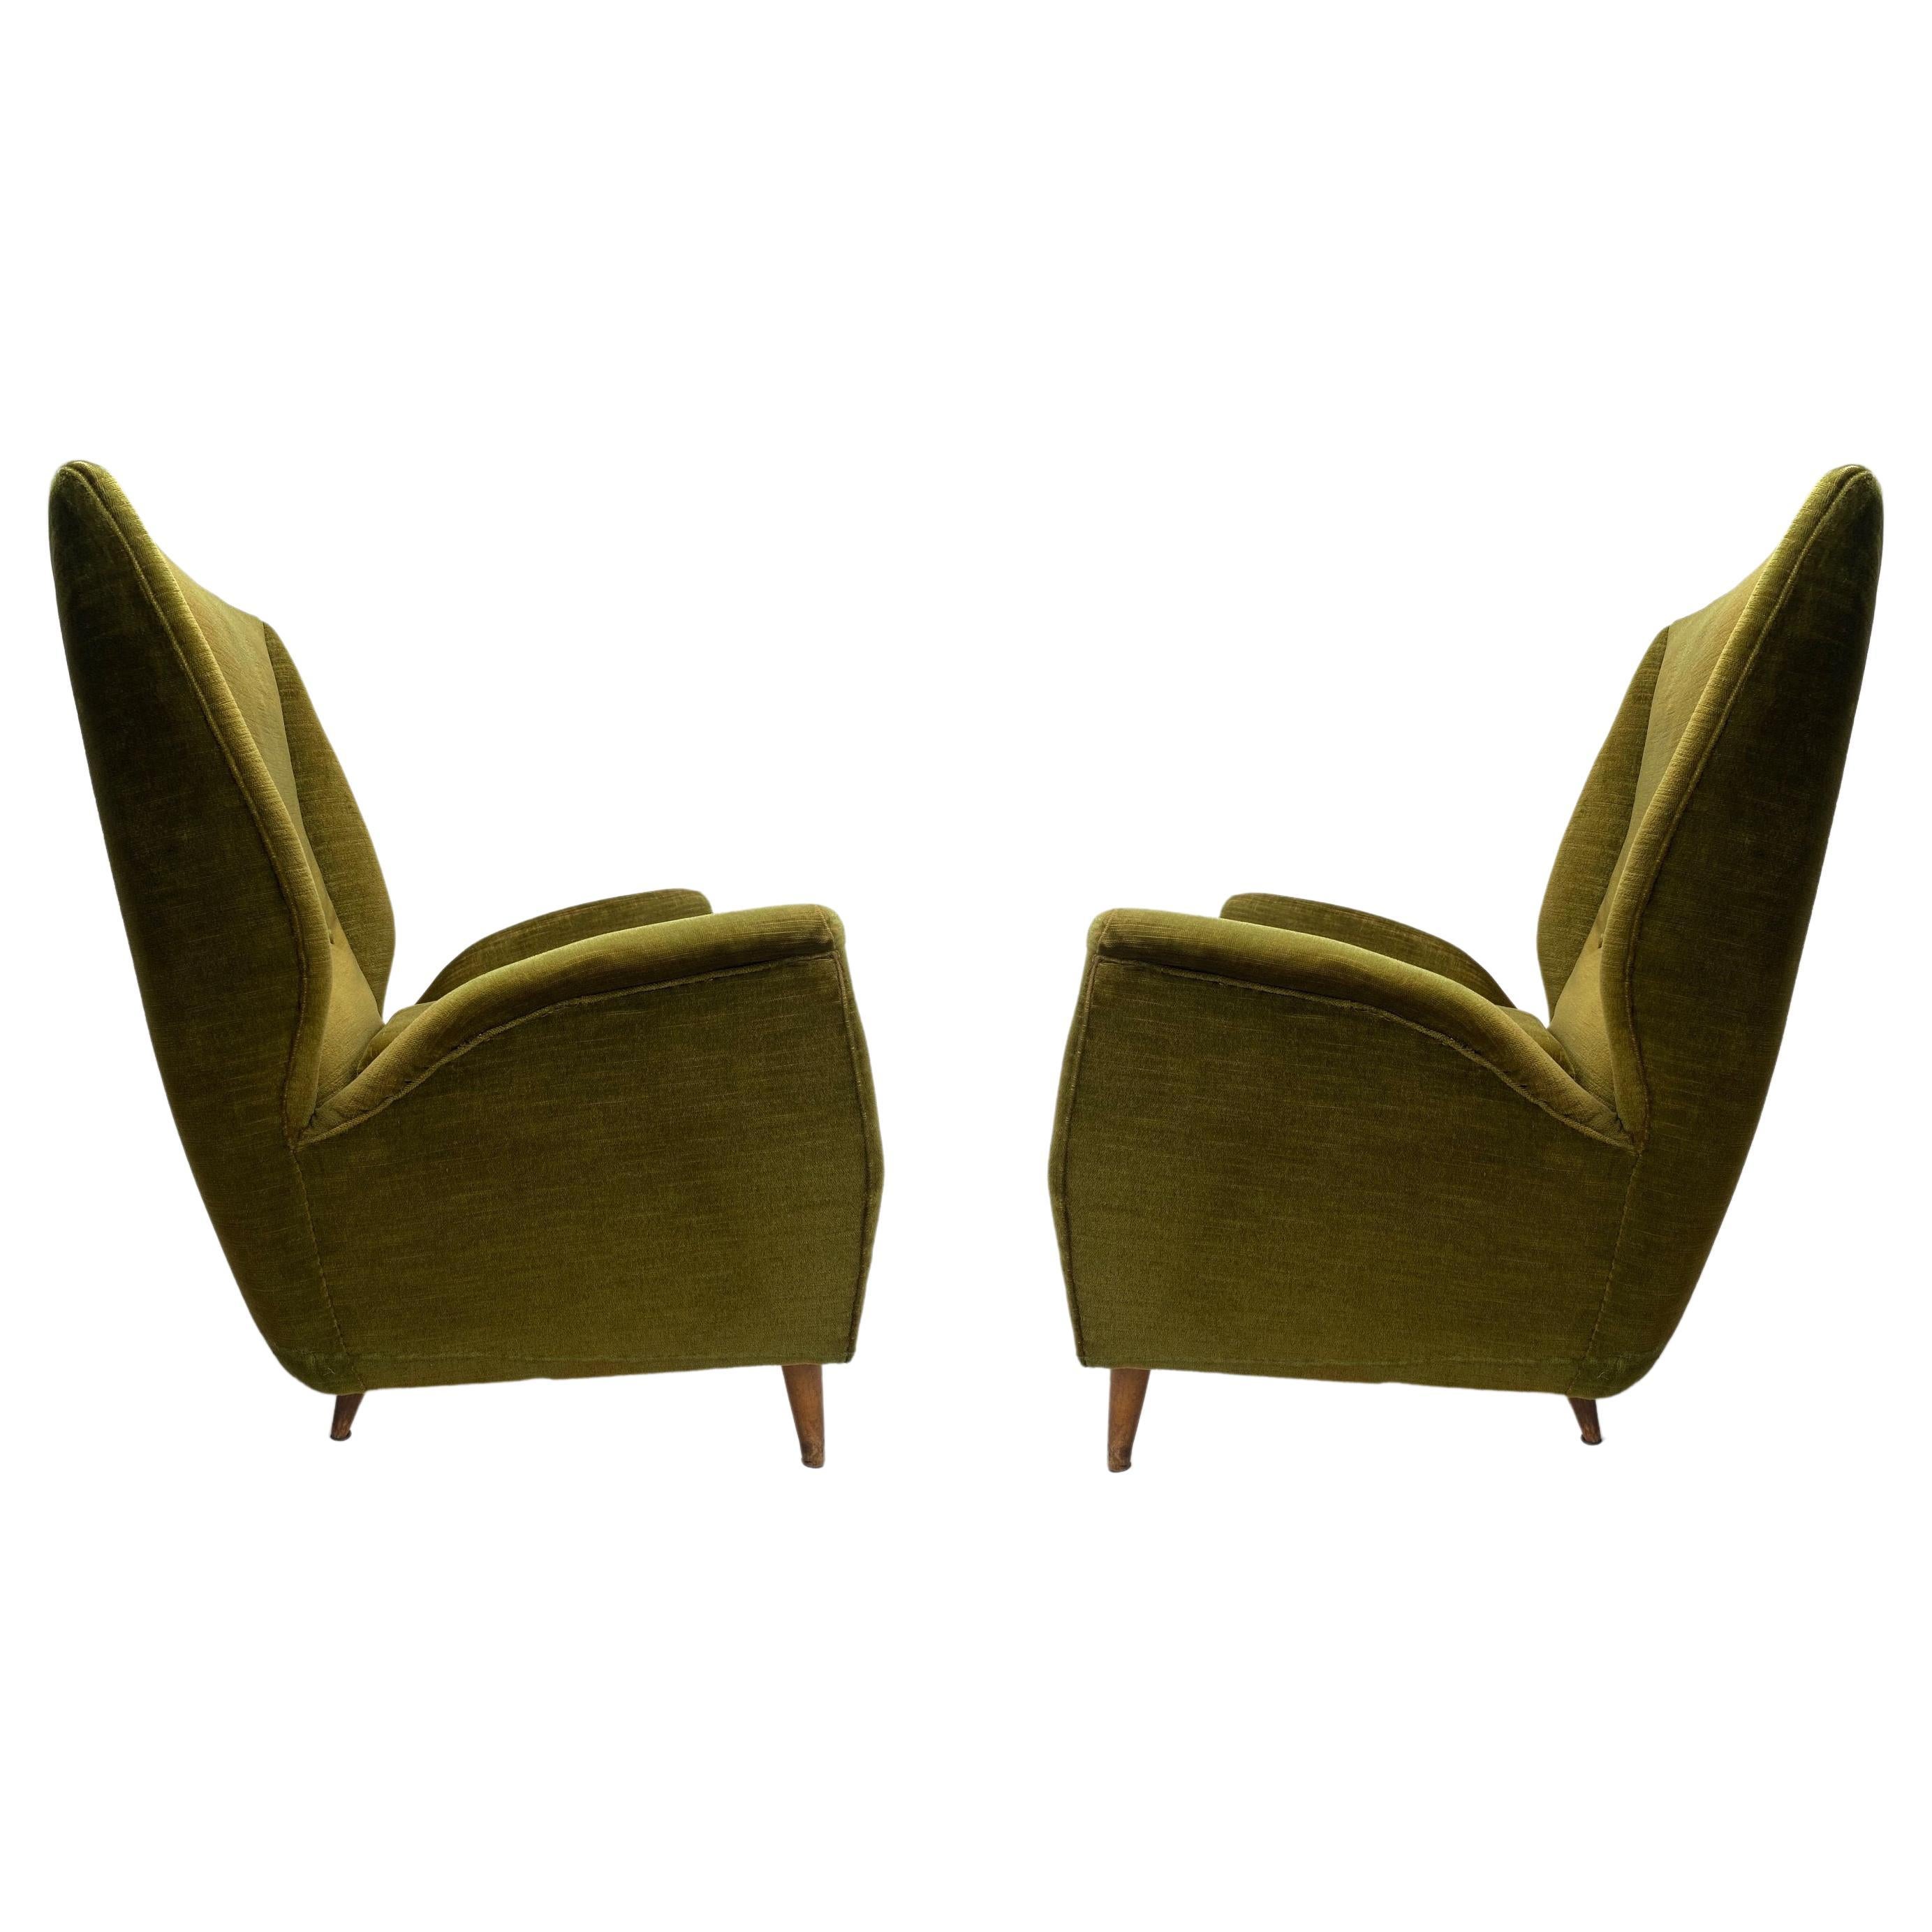 Gio Ponti, rare pair of Wingback Armchairs for ISA, Italy, 1950s (customizable)